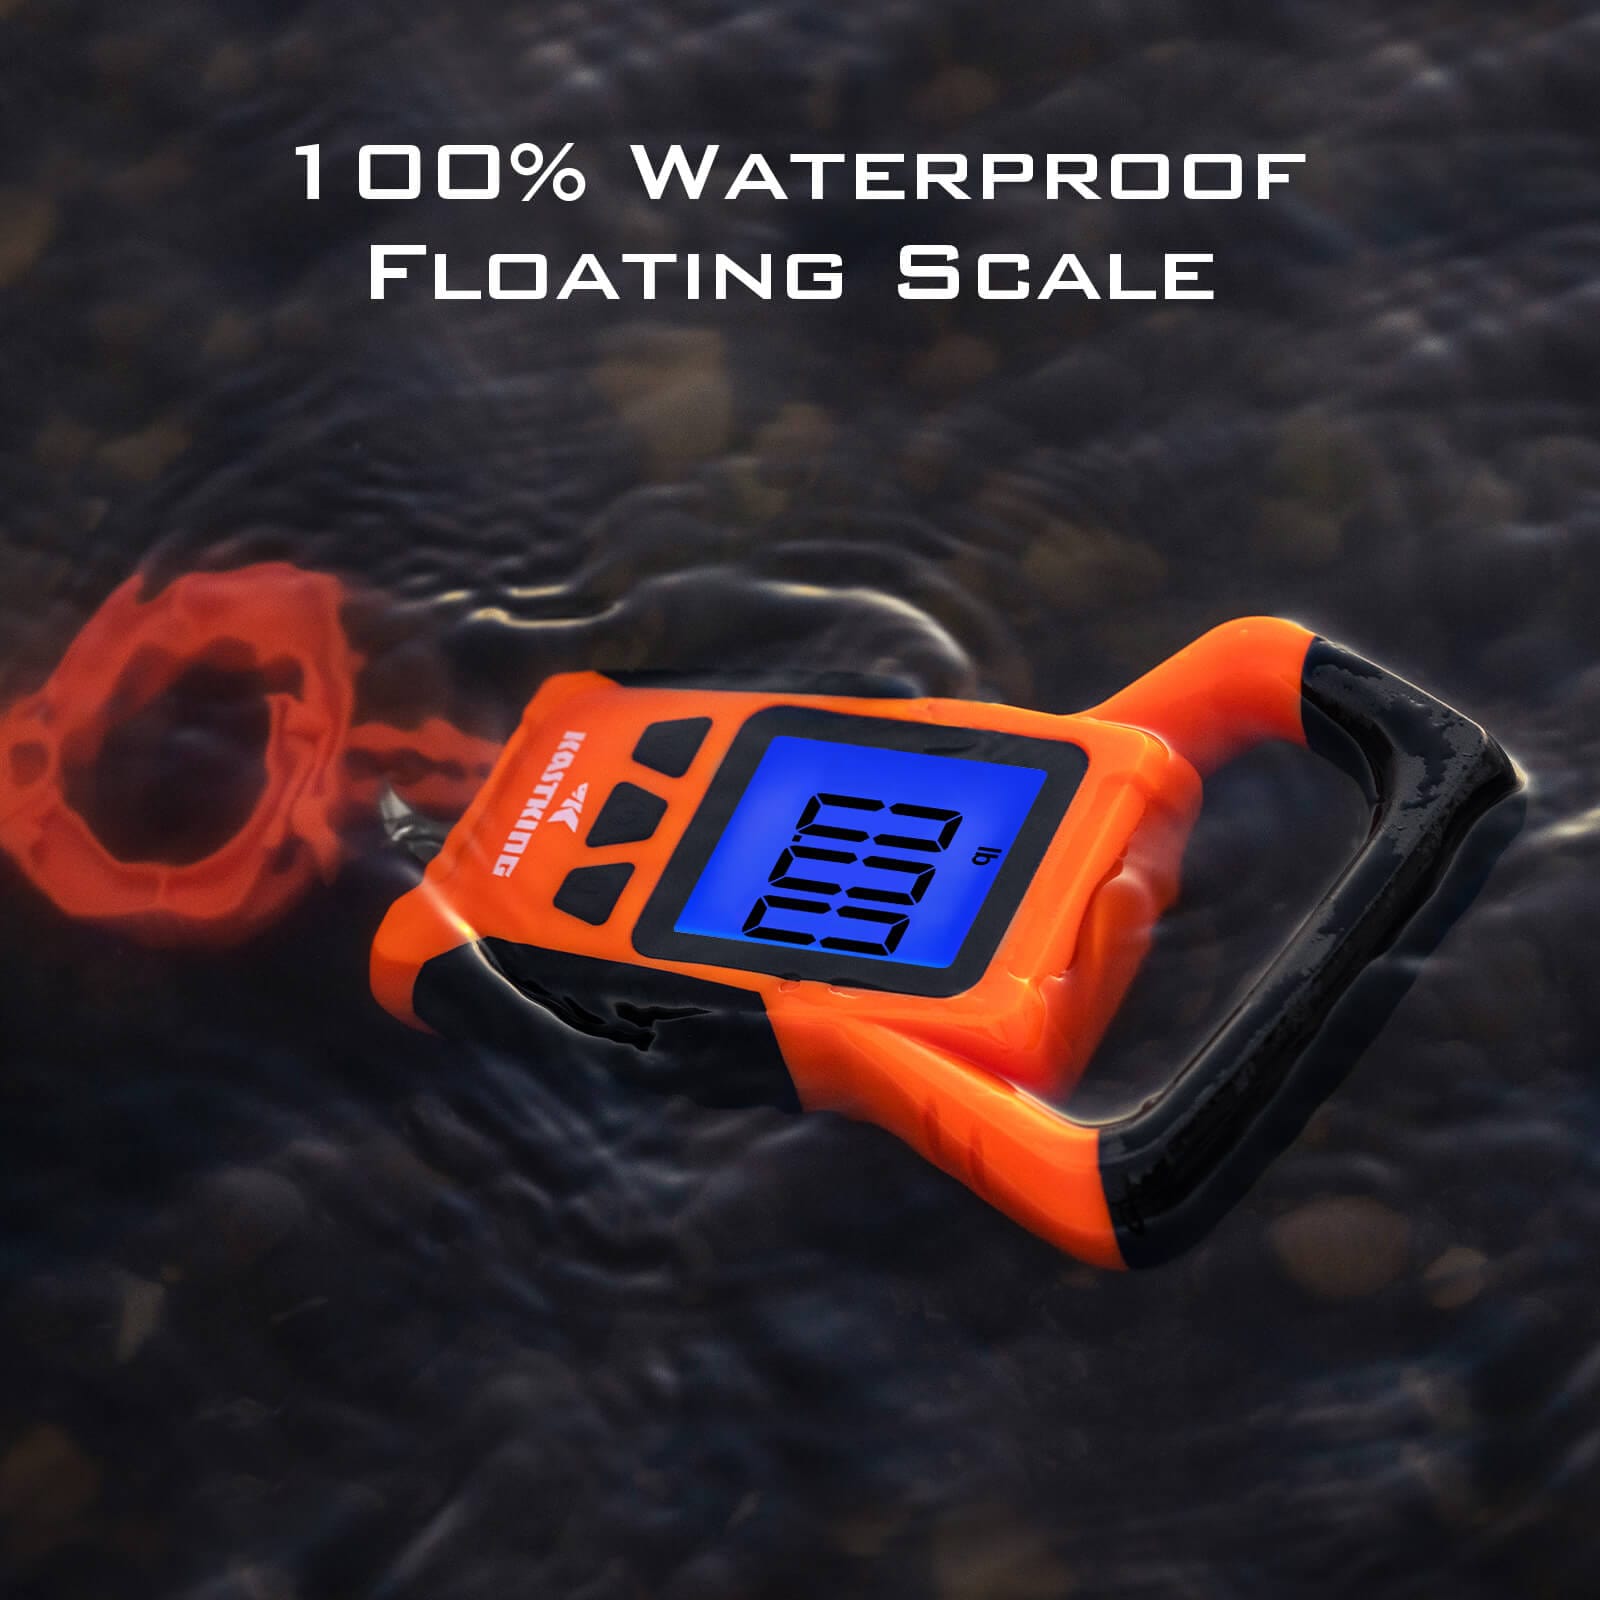 Waterproof Digital Fishing Scale With Ruler, Dual Mode - Lbs/oz And Kg,  Zero 100lbs/50kg, Lightweight, Sturdy Abs Frame, Non-slip Handle,  Retractable